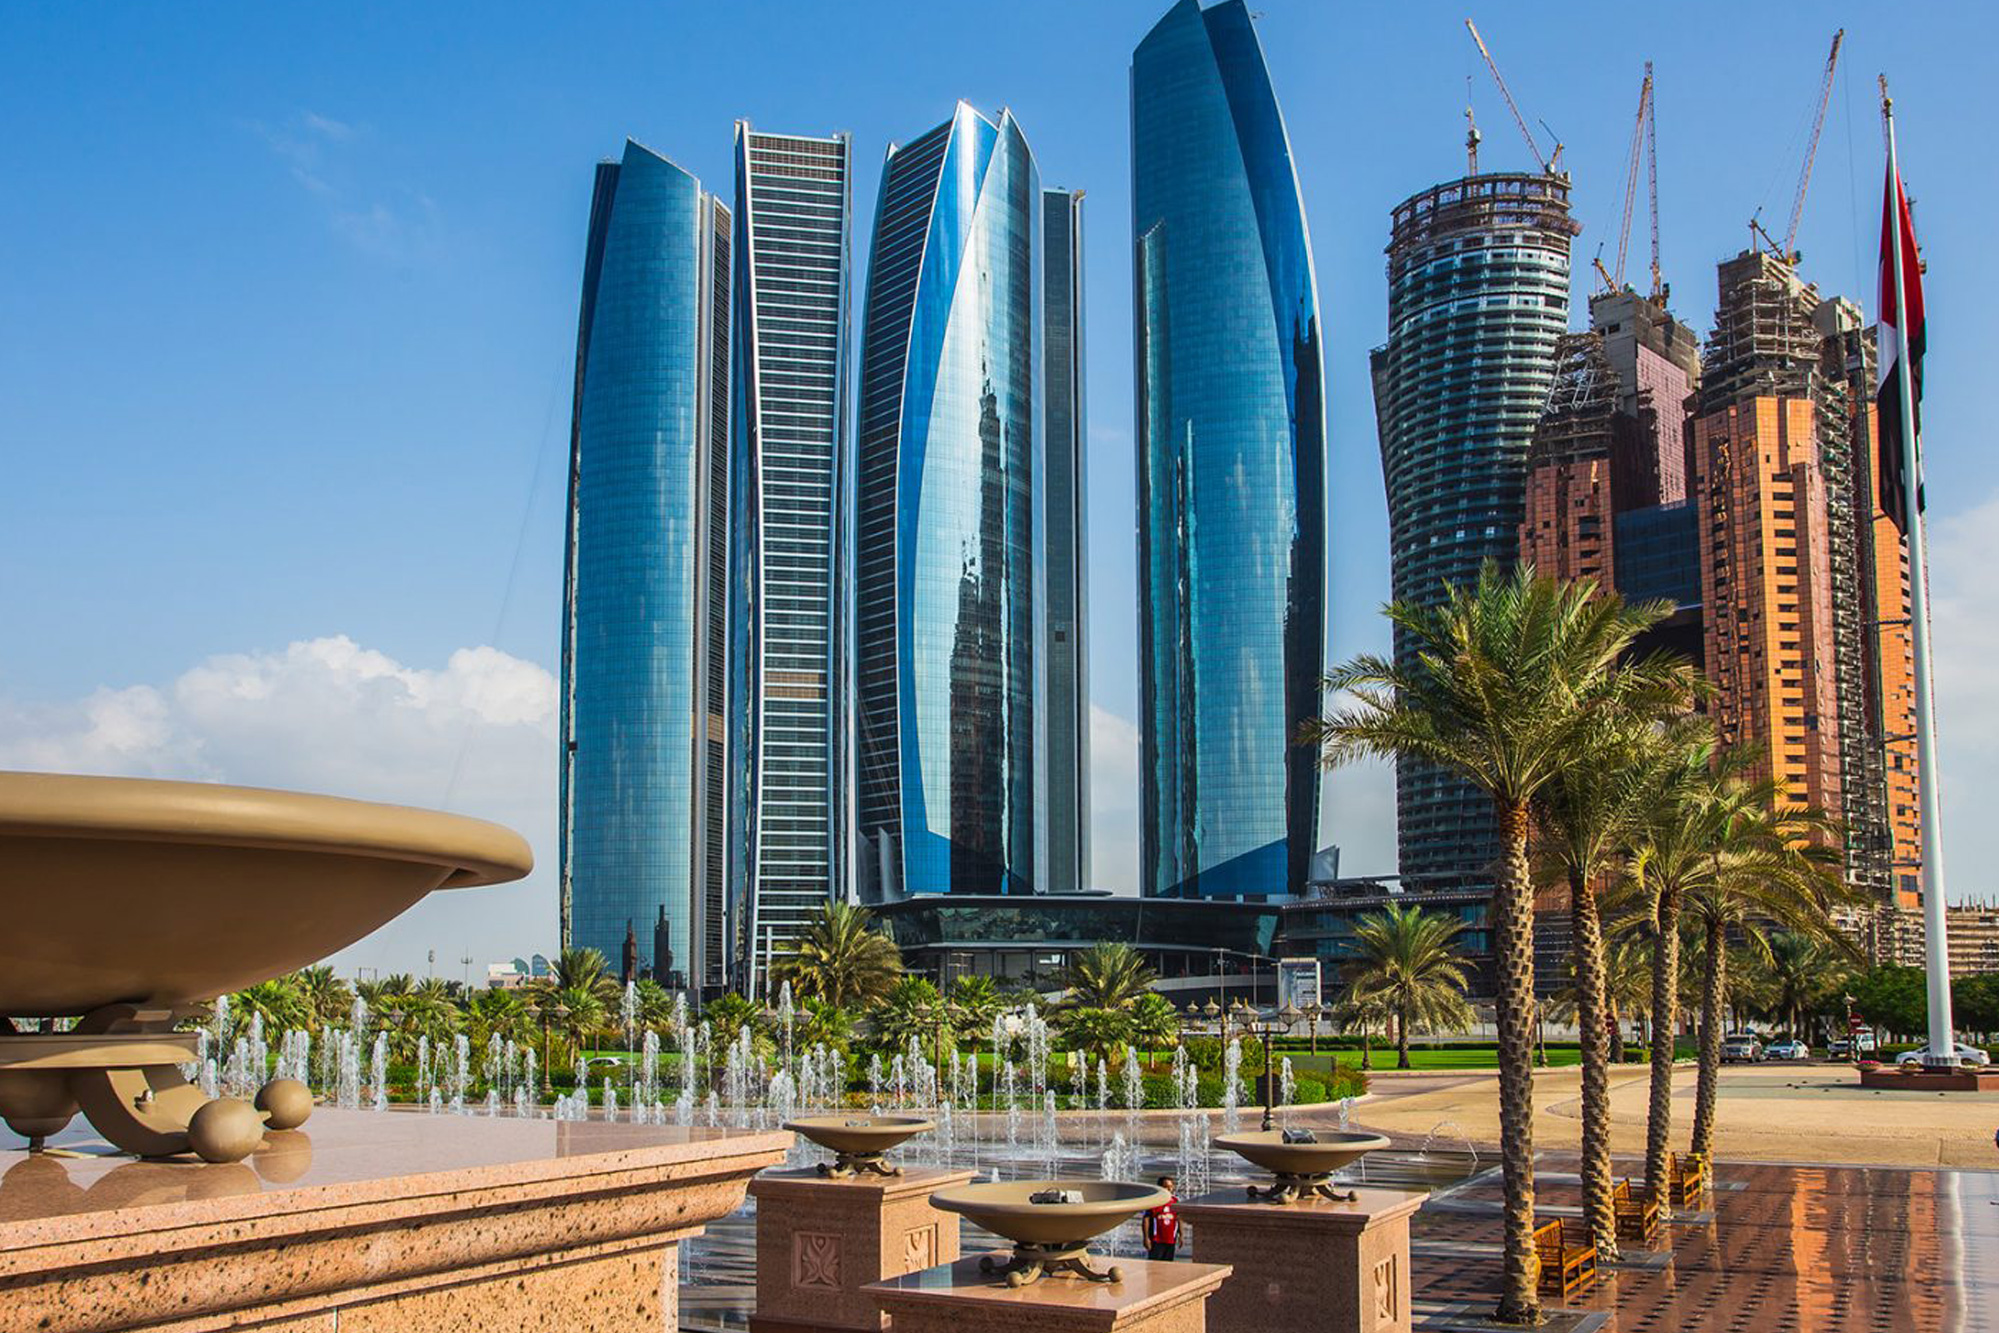 UAE is on the verge to achieve a growth of 4.2 percent for 2022 while the inflationary pressure is rising according to the latest review by the UAE Central Bank. The GDP grew by 2.3 percent in 2021 up from an earlier forecast of 2.1 percent.